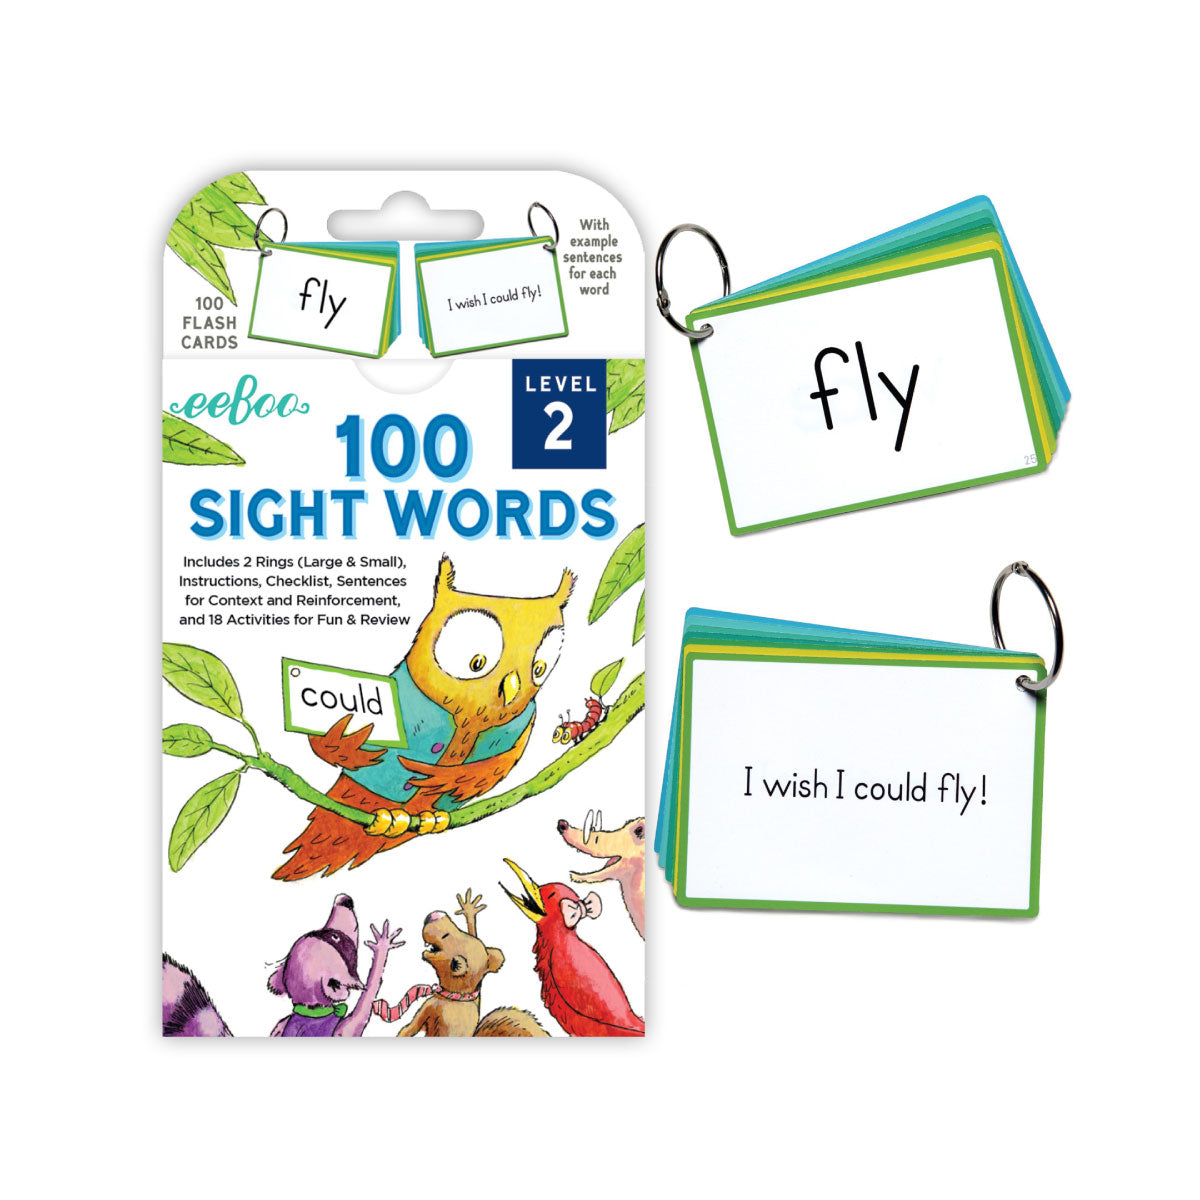 100 Sight Words Level 2 Flash Cards from eeBoo